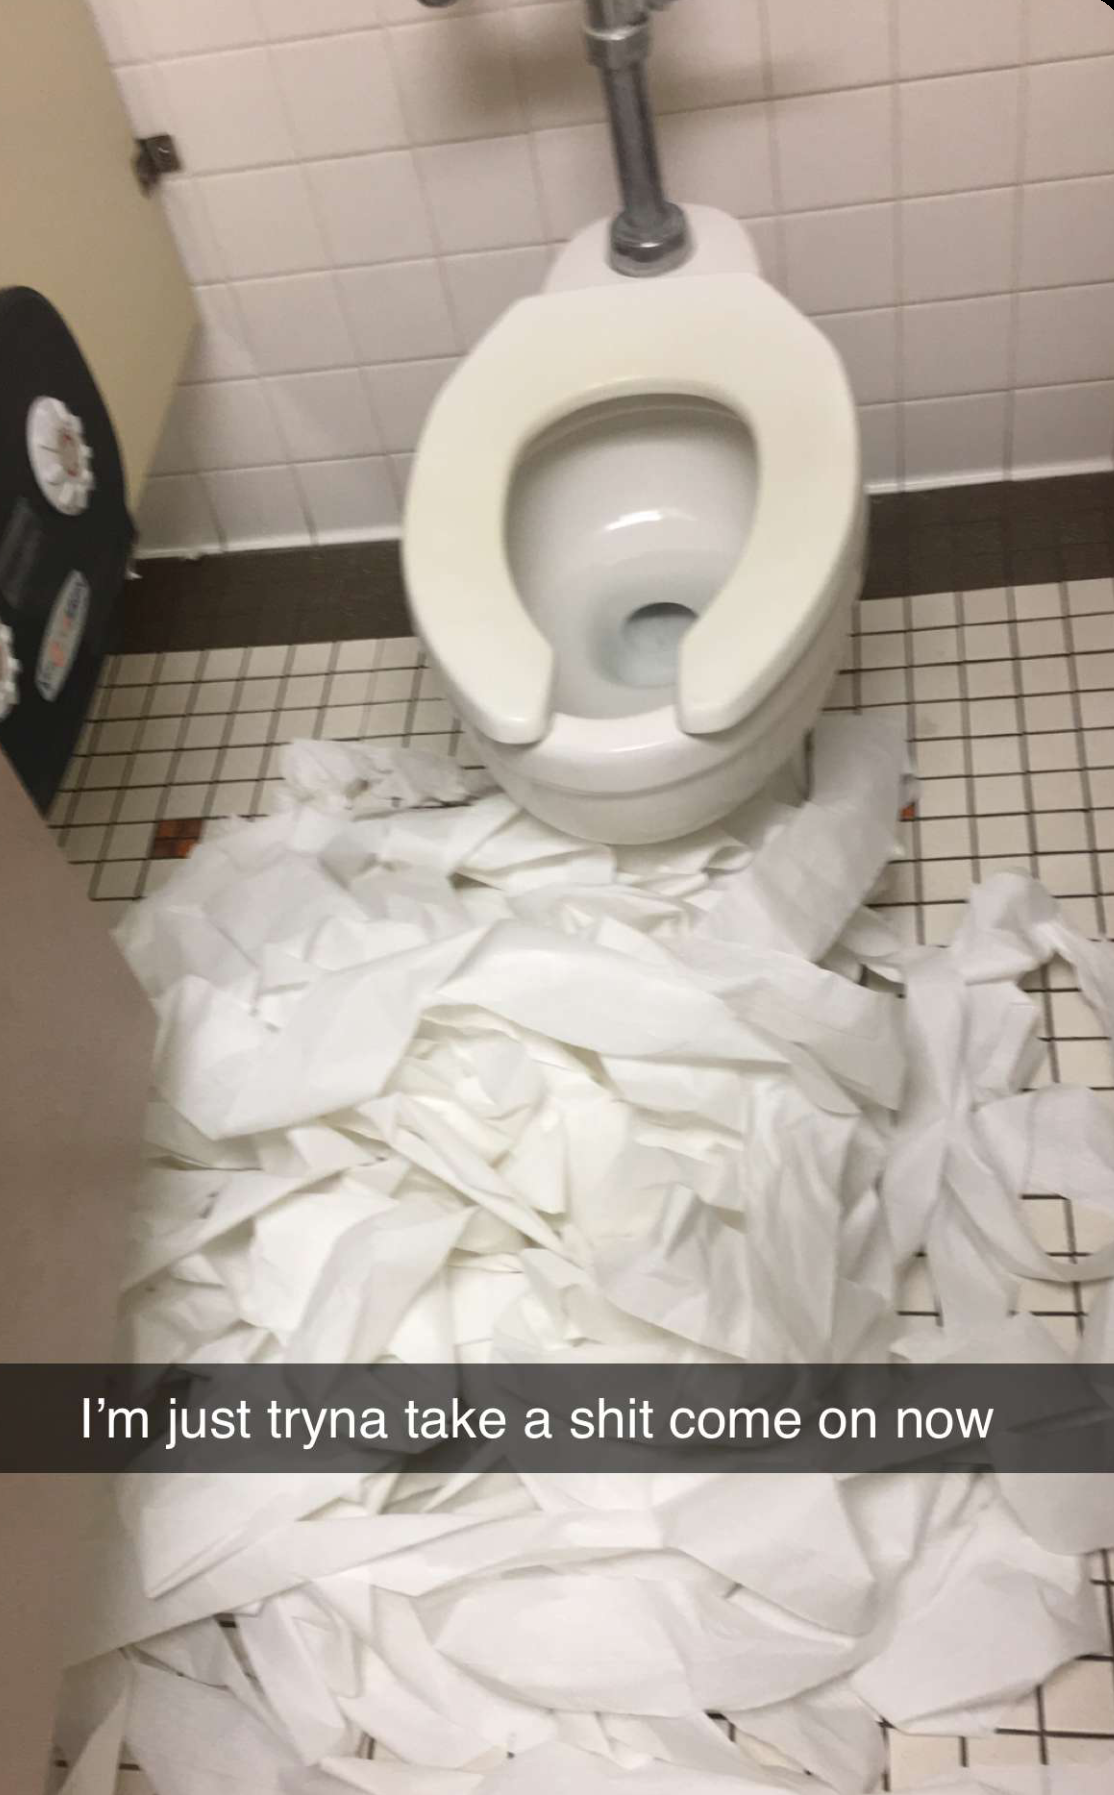 toilet seat - I'm just tryna take a shit come on now